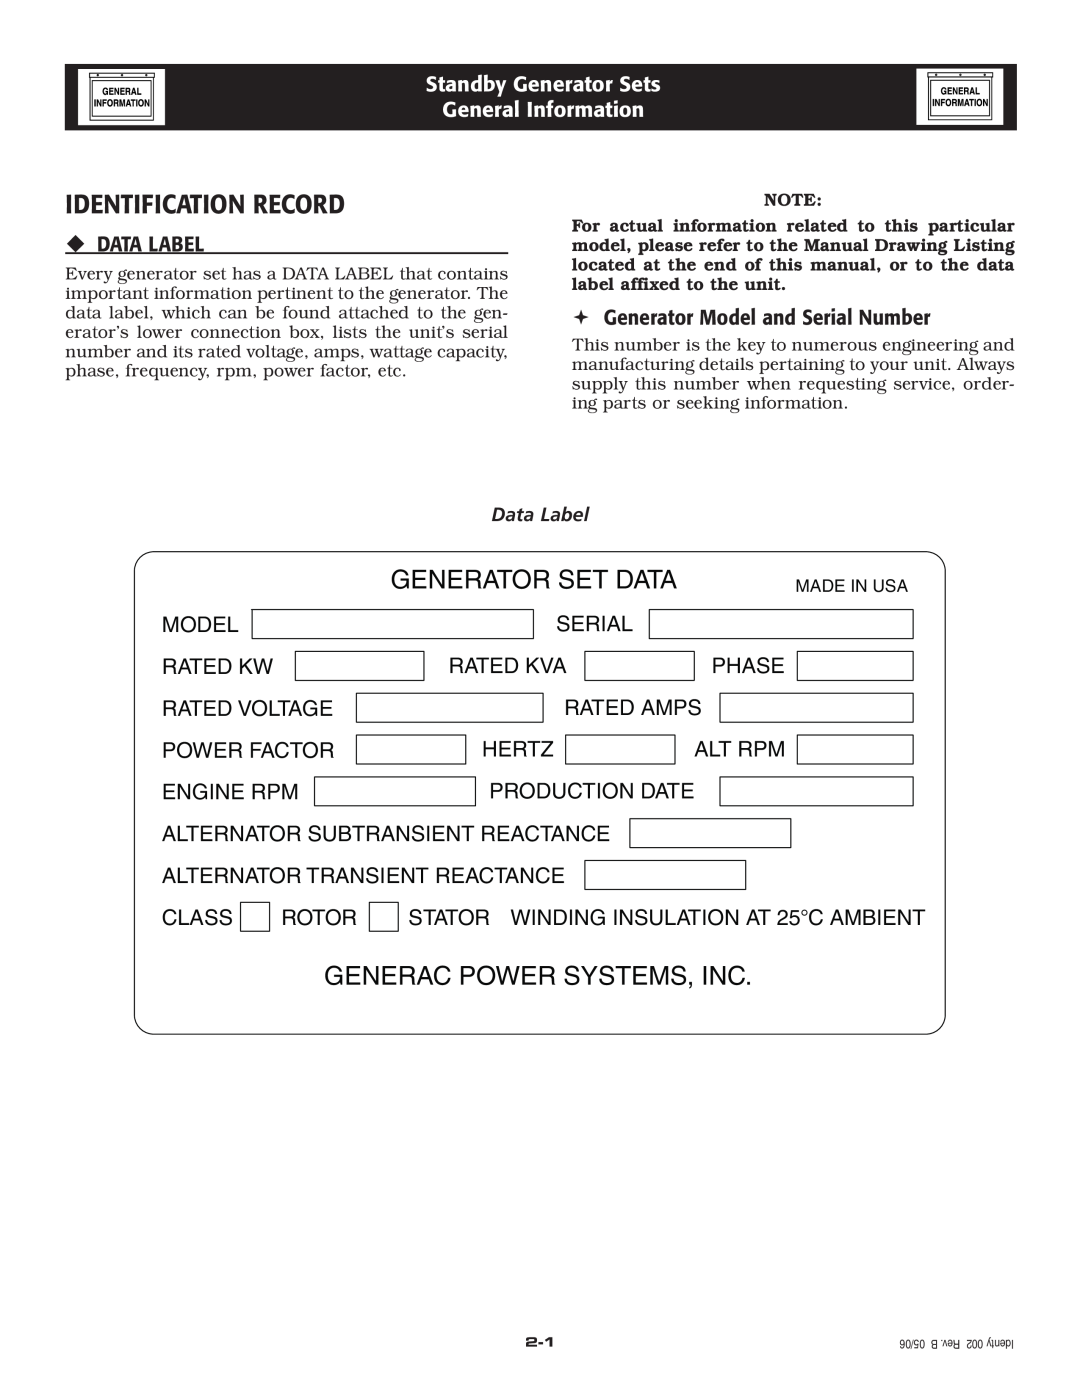 Generac Power Systems 005336-0, 005337-0 Identification Record, Standby Generator Sets General Information, ‹ Data Label 